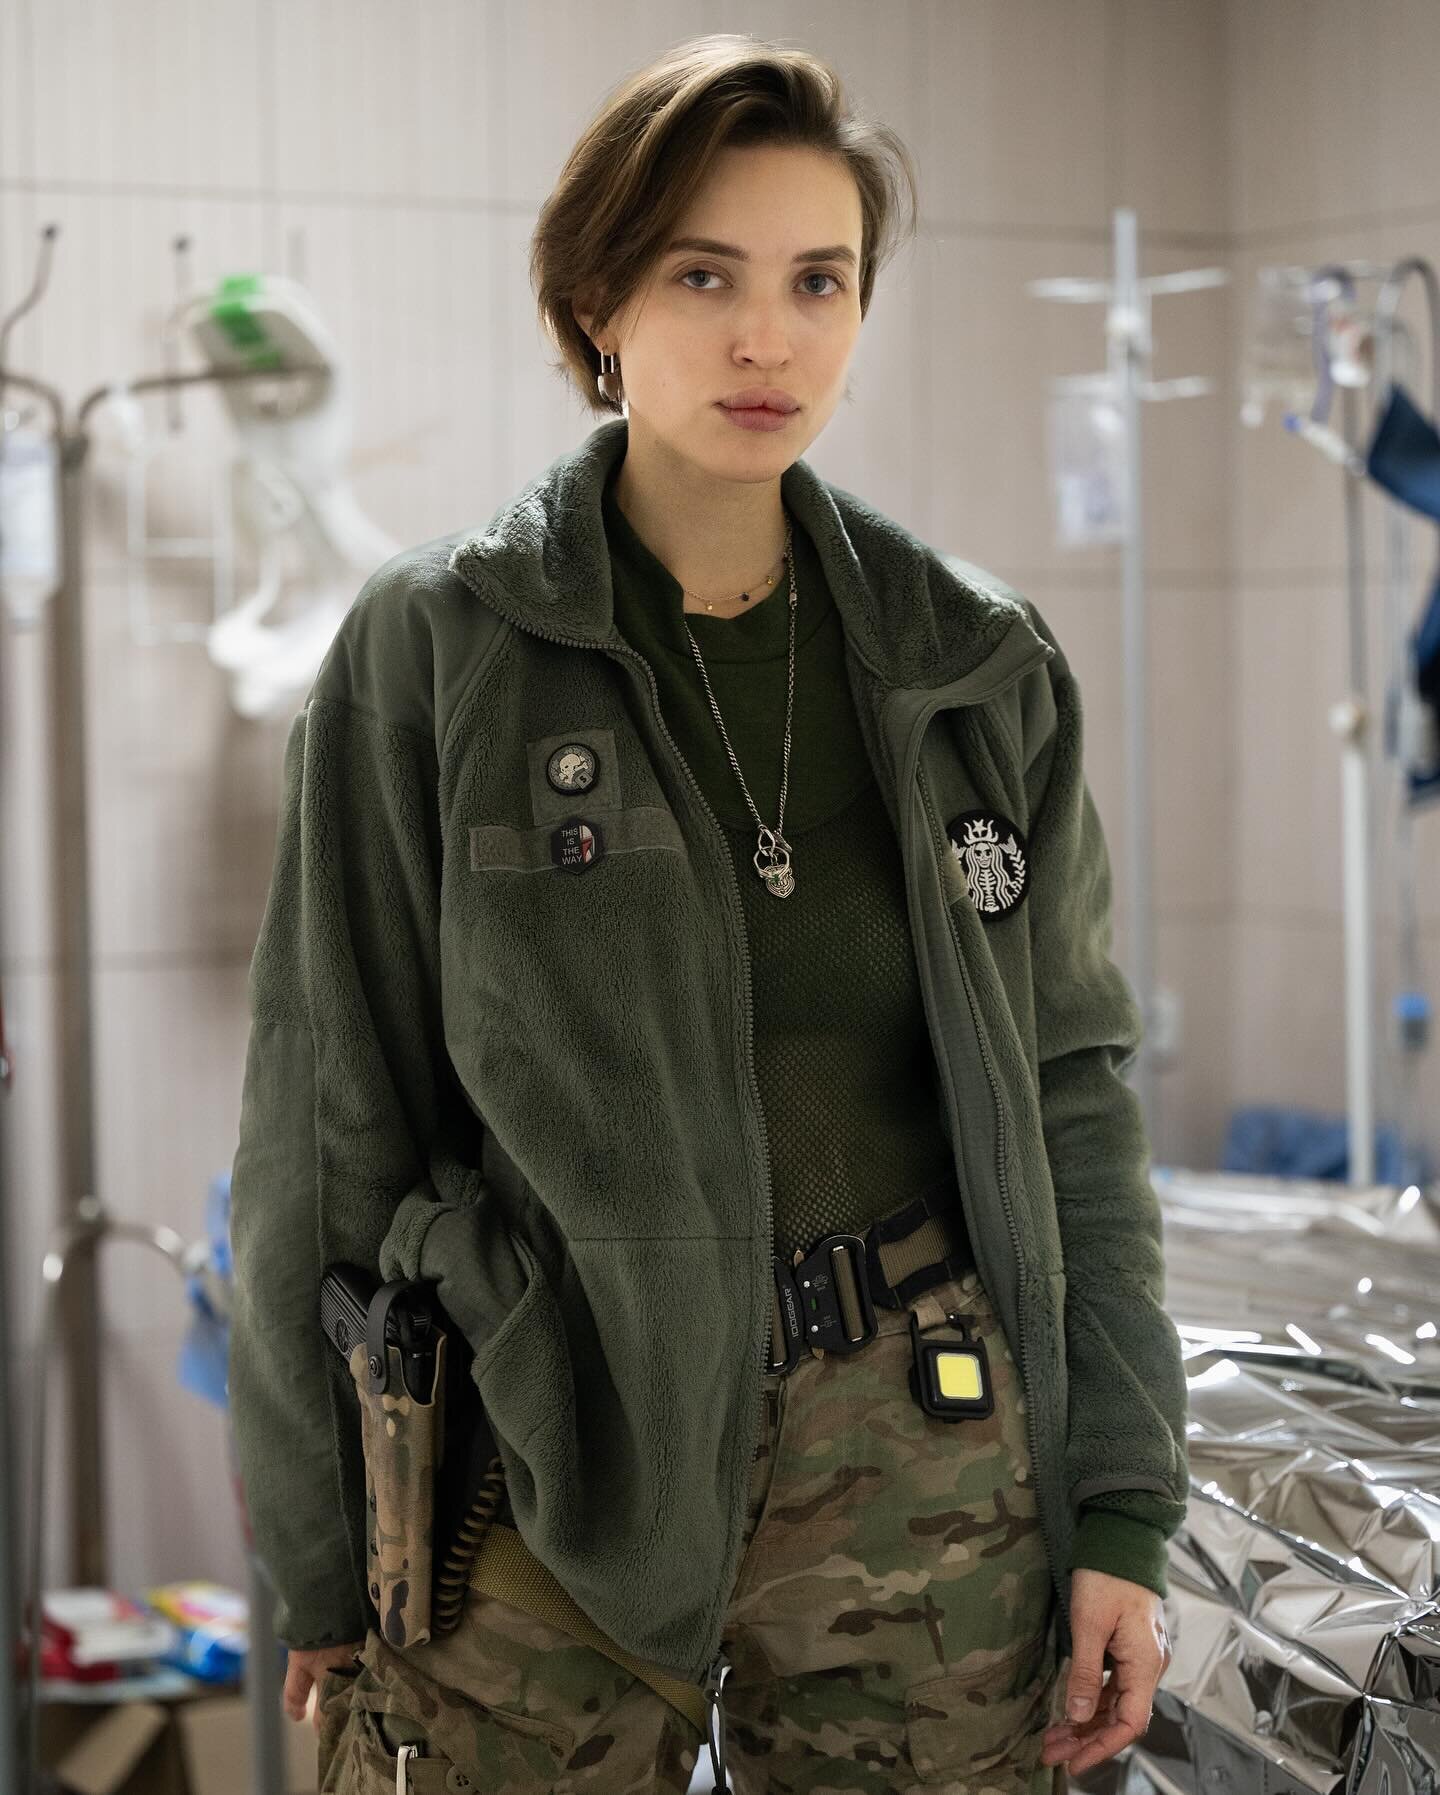 As a combat medic in the Ukrainian Armed Forces, Sara has seen the worst of war firsthand. With more than a year of service under her belt, she has saved countless lives and treated wounded soldiers at the hottest points of the front line.&nbsp;

I h